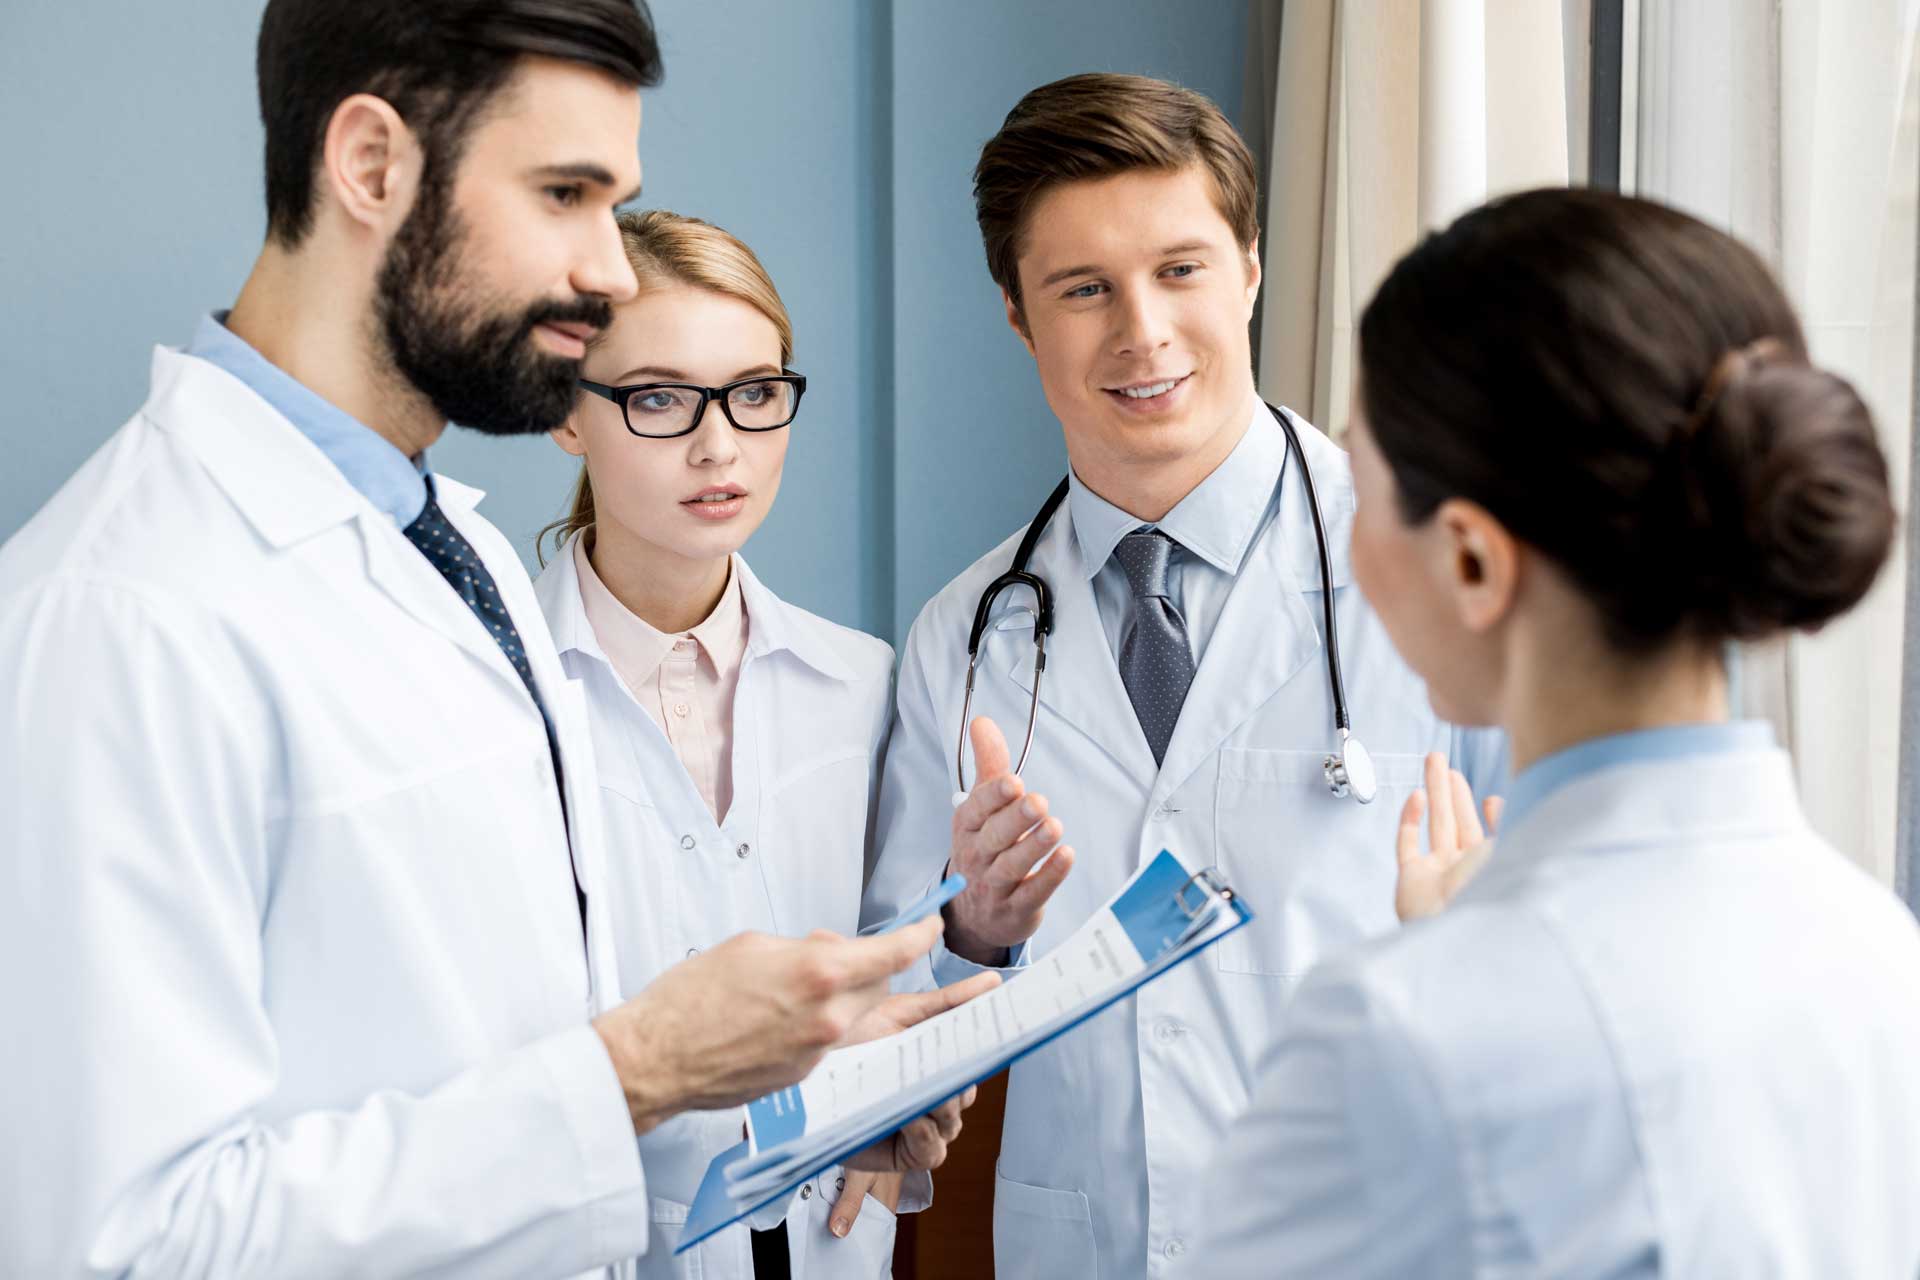 side-view-of-doctors-team-discussing-diagnosis-in-H9FJMNX.jpg